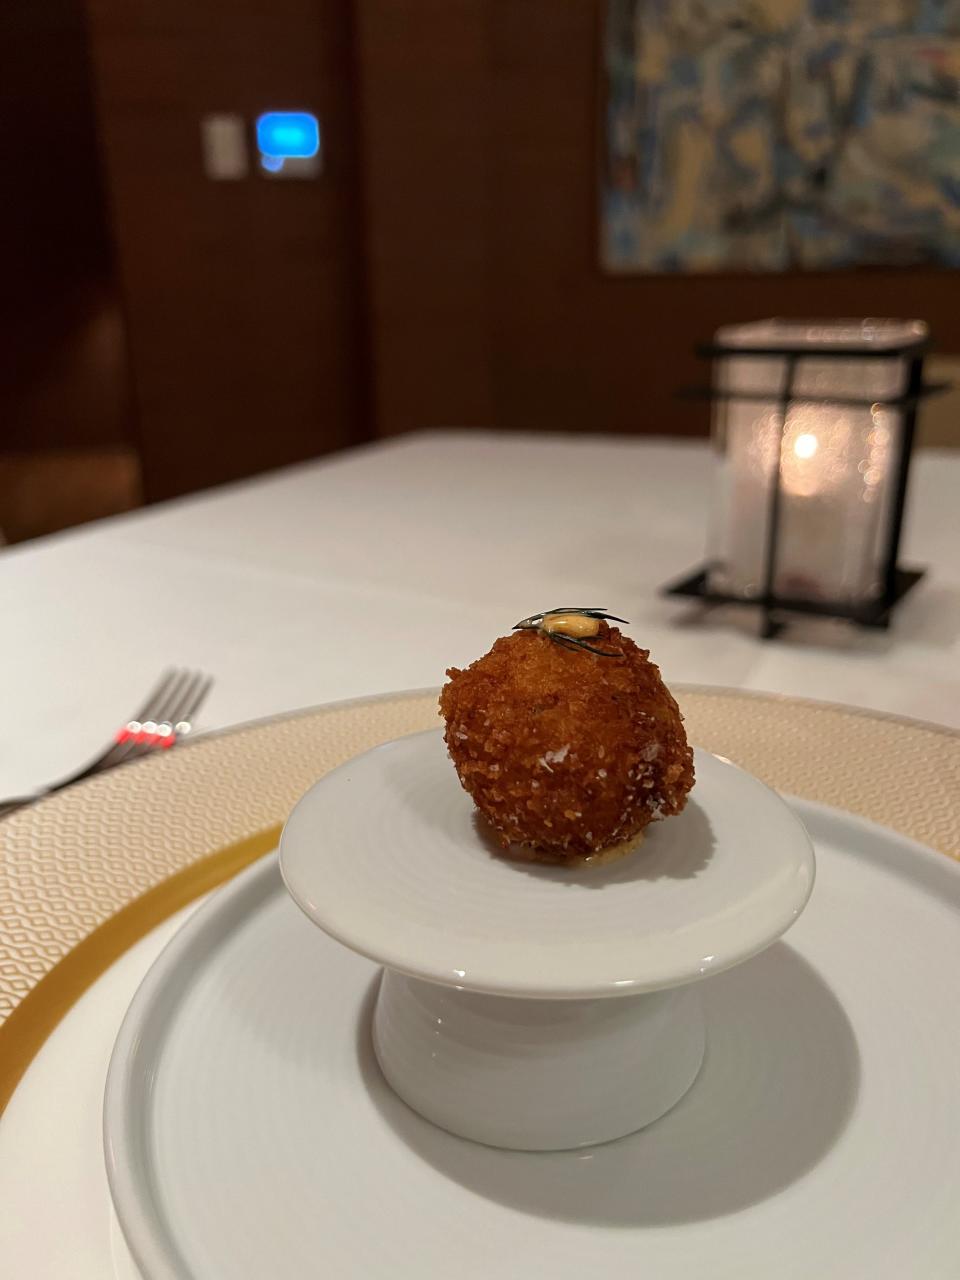 The amuse bouche, a gift from the chef, set the tone for dinner at Oak Park.